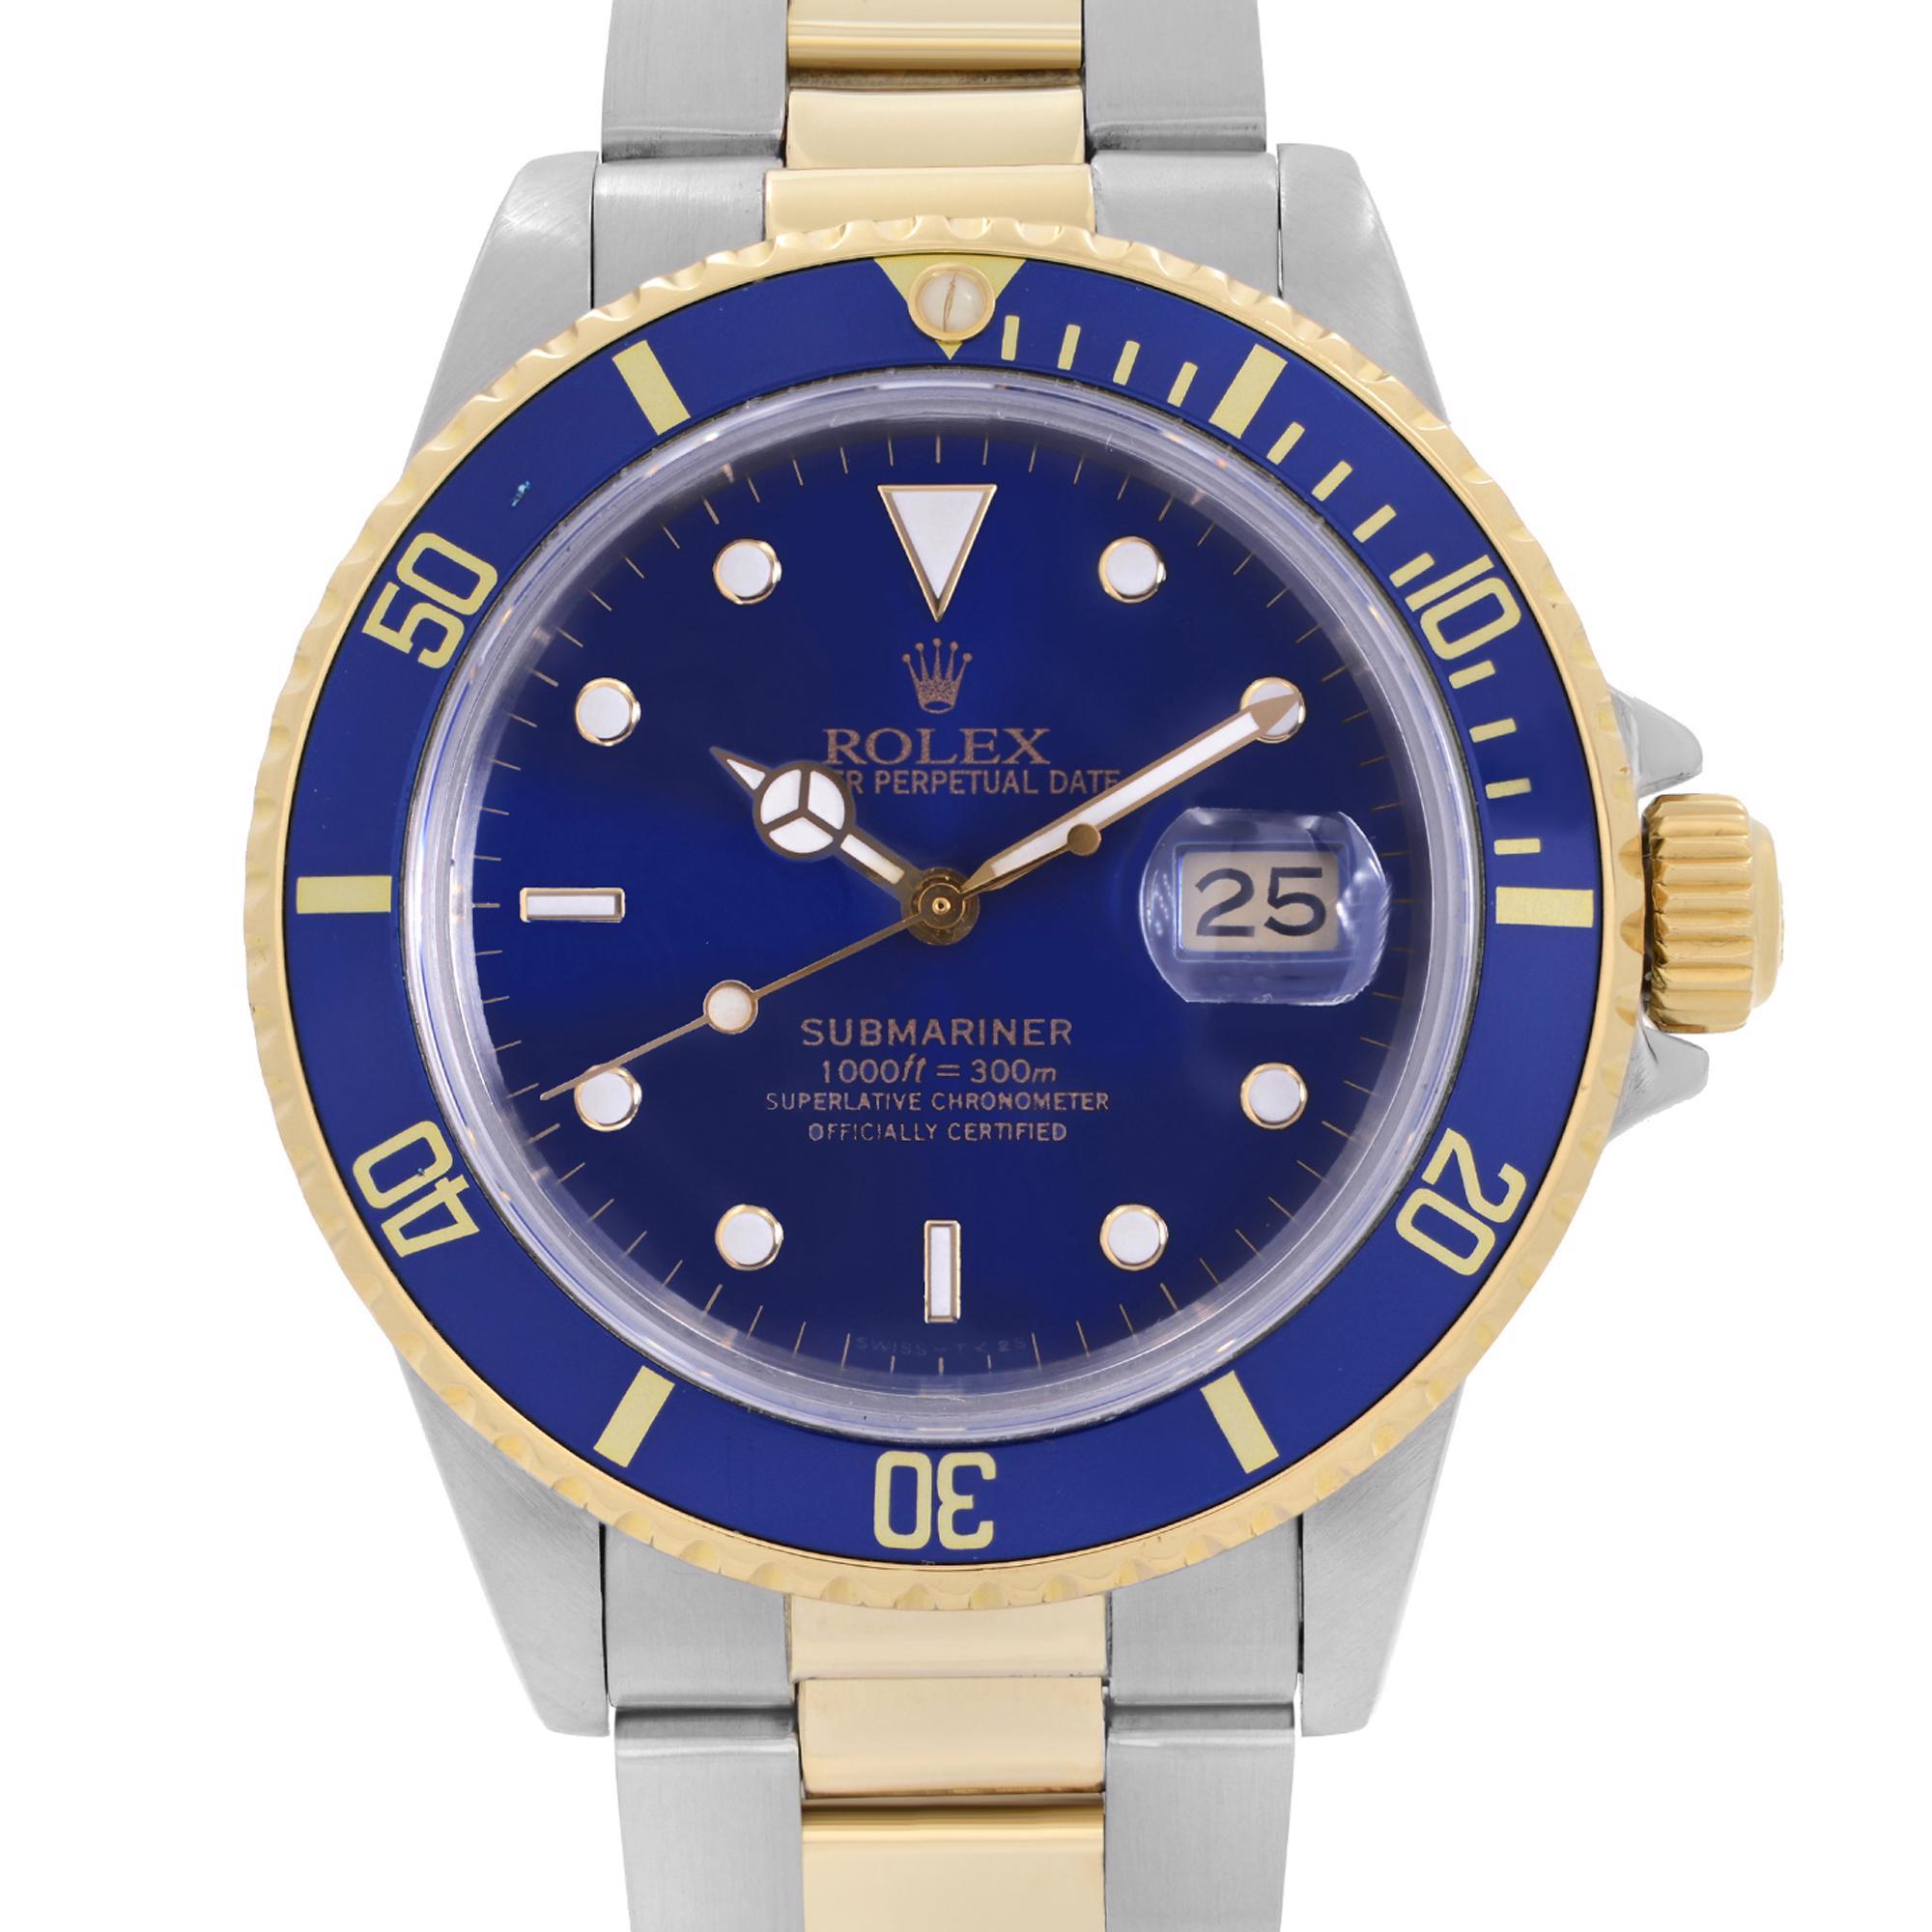 Pre-owned. No original box and papers. Covered by 2-year chronostore warranty. 

Details:
Brand Rolex
Type Wristwatch
Department Men
Model Number 16803
Country/Region of Manufacture Switzerland
Style Luxury, Sport
Model Rolex Submariner 16803